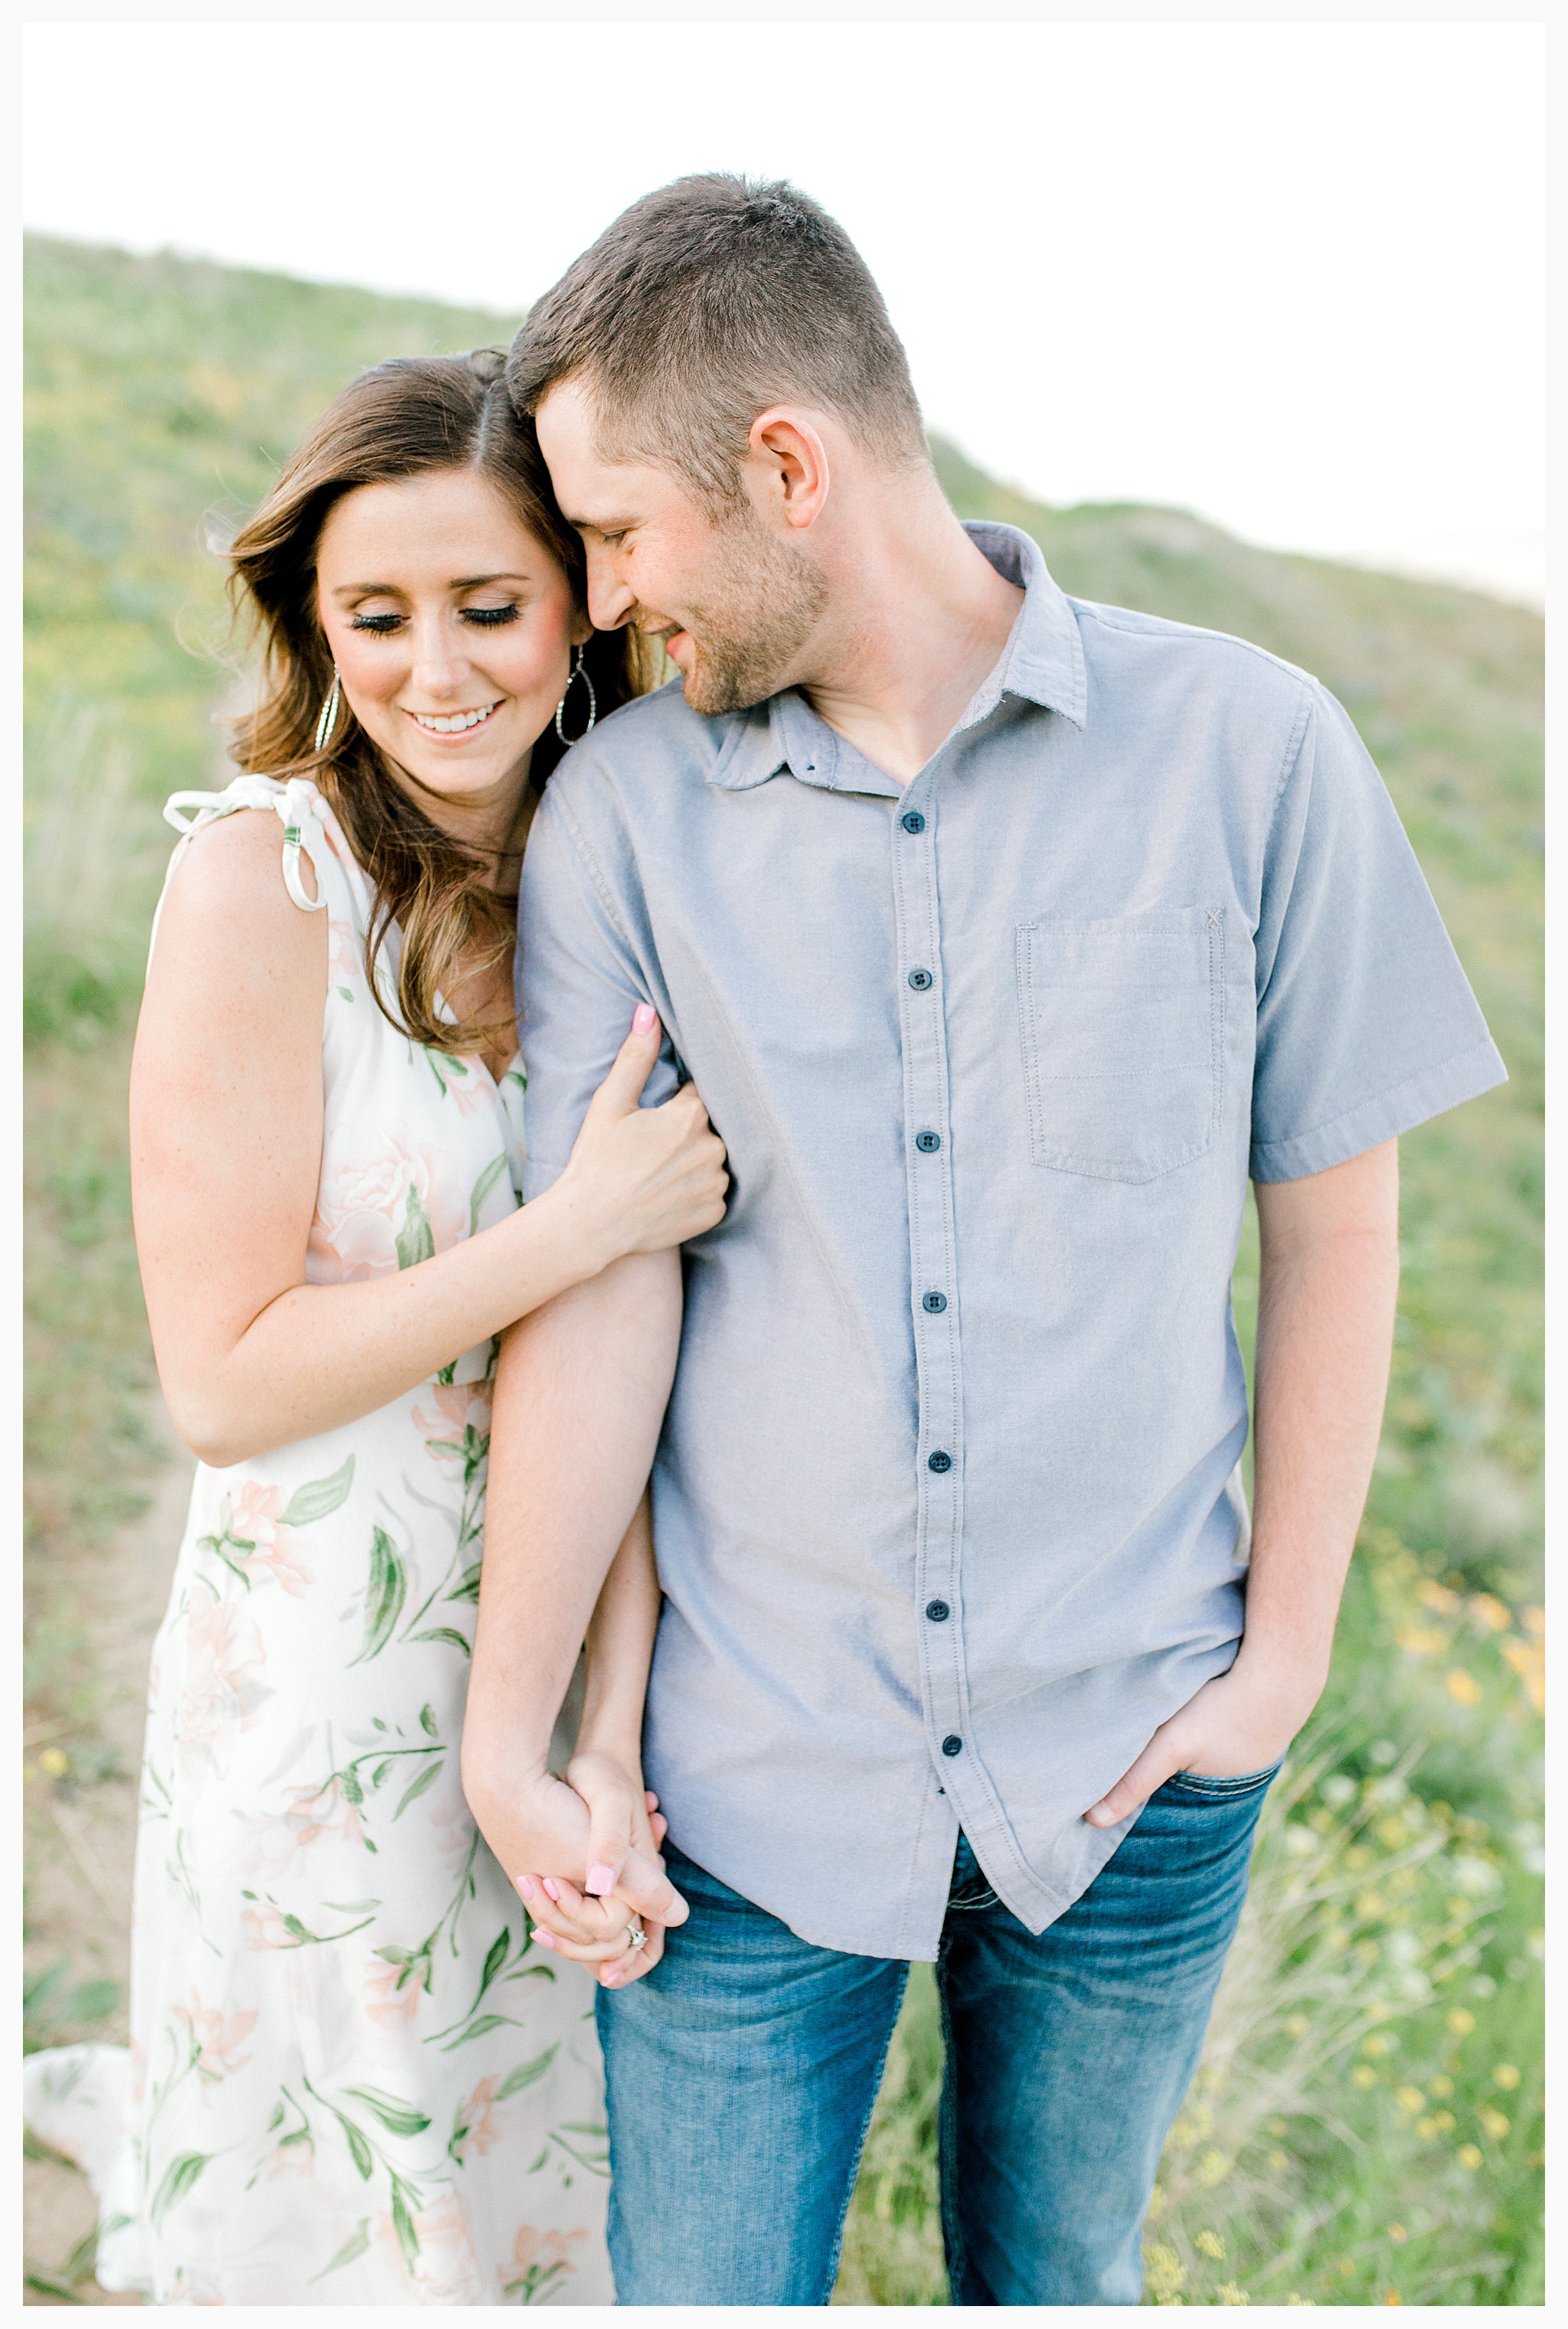 Engagement session amongst the wildflowers in Wenatchee, Washington | Engagement Session Outfit Inspiration for Wedding Photography with Emma Rose Company | Light and Airy PNW Photographer, Seattle Bride_0004.jpg